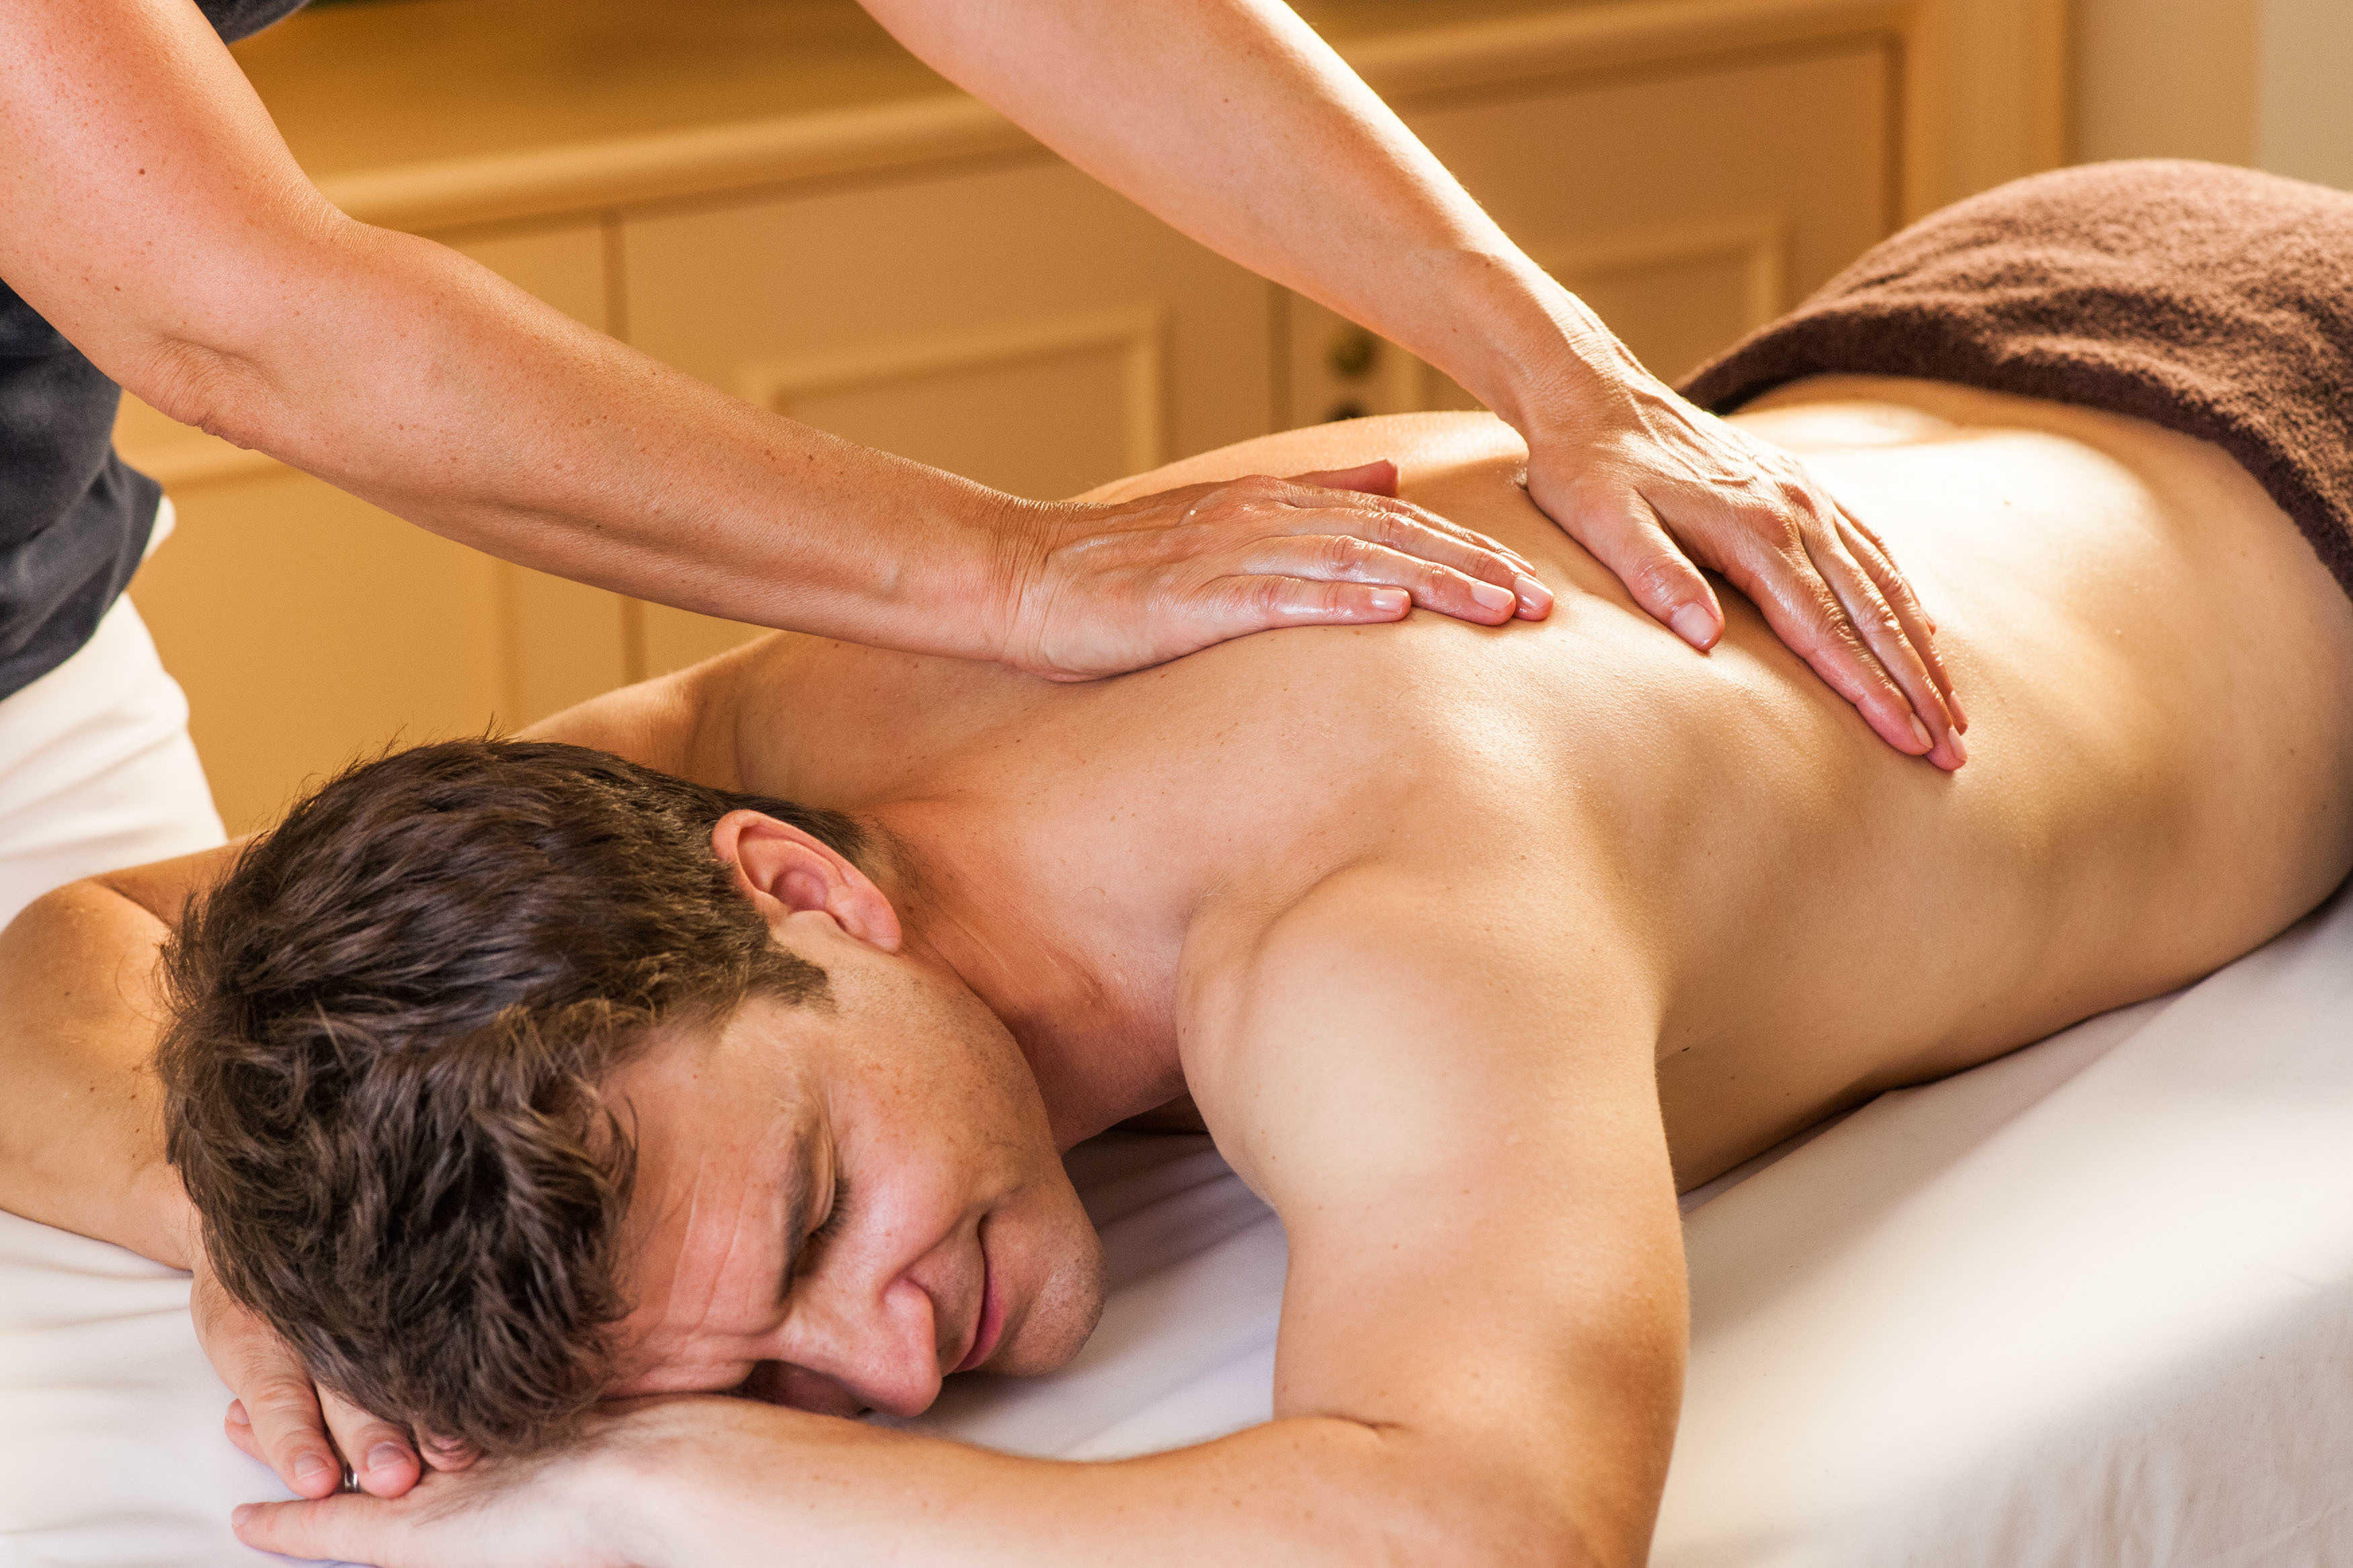 Muscle-relaxing back massage with natural oils in the 4-star hotel Ringhotel Birke in Kiel